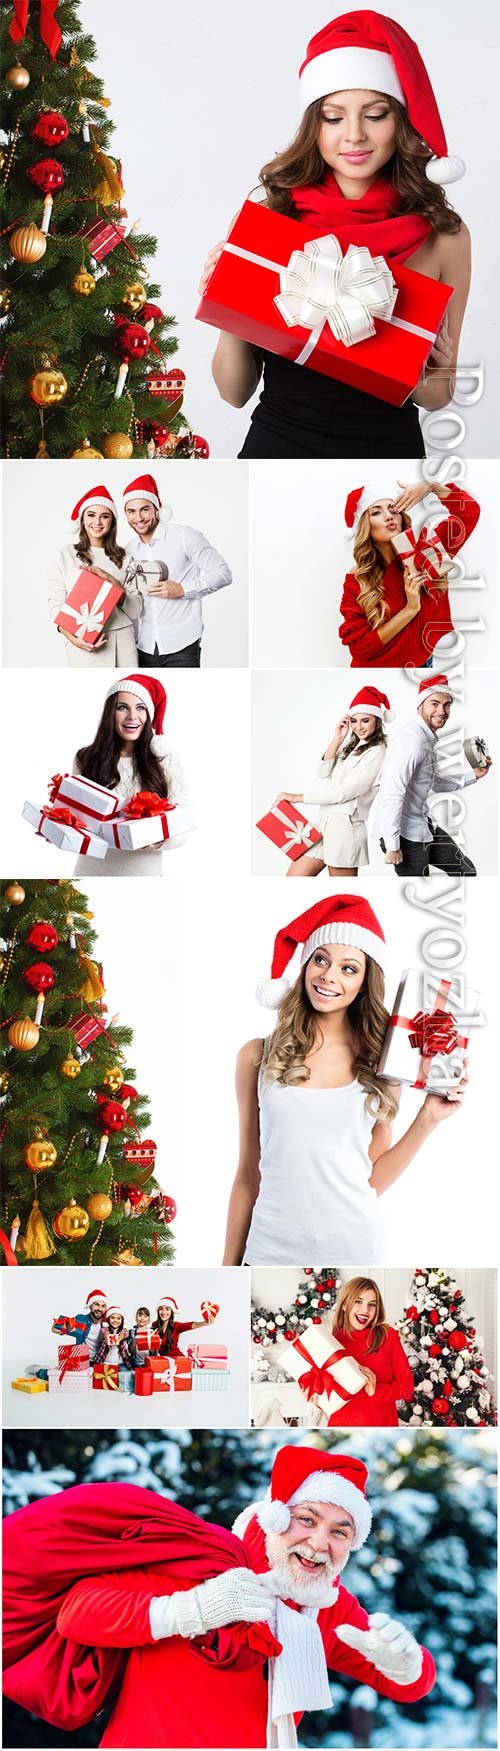 Christmas and New Year stock photo collection